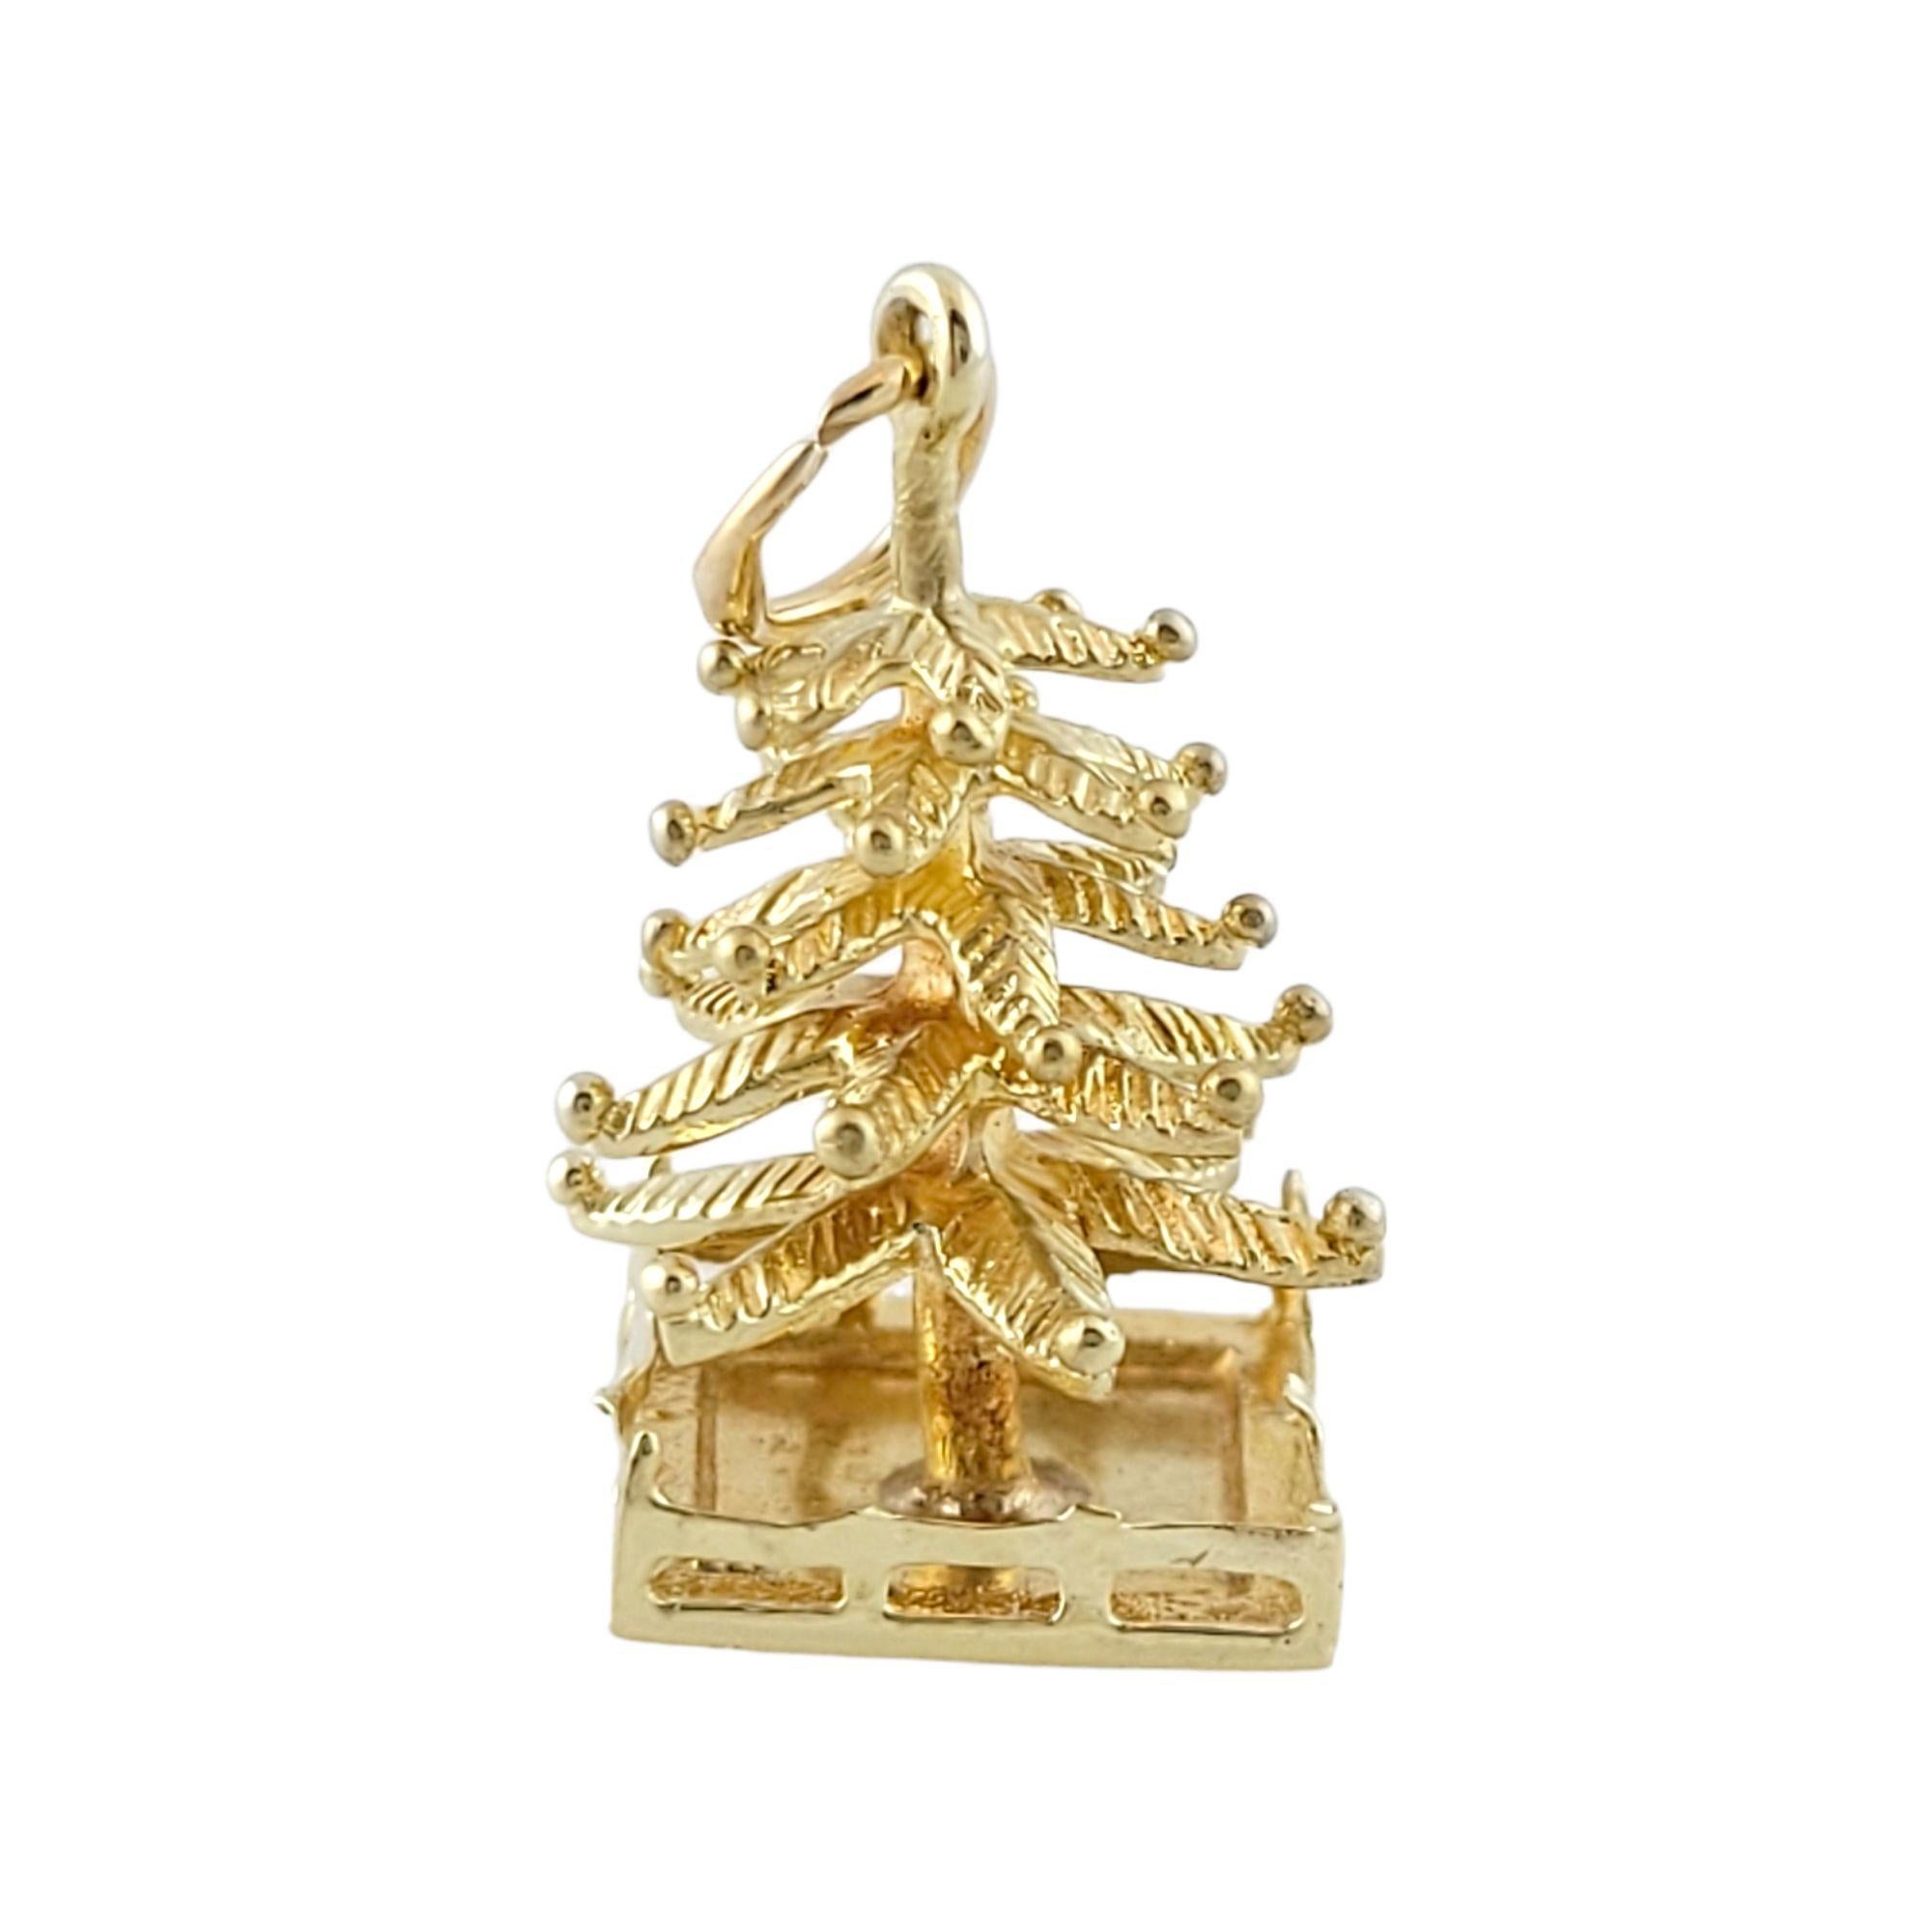 Vintage 14K Yellow Gold Christmas Tree Charm

This adorable 14K gold Christmas tree charm is perfect for the holidays!

Size: 22mm X 12mm X 12mm

Weight: 4.9 g/ 3.1 dwt

Hallmark: 14K

Very good condition, professionally polished.

Will come